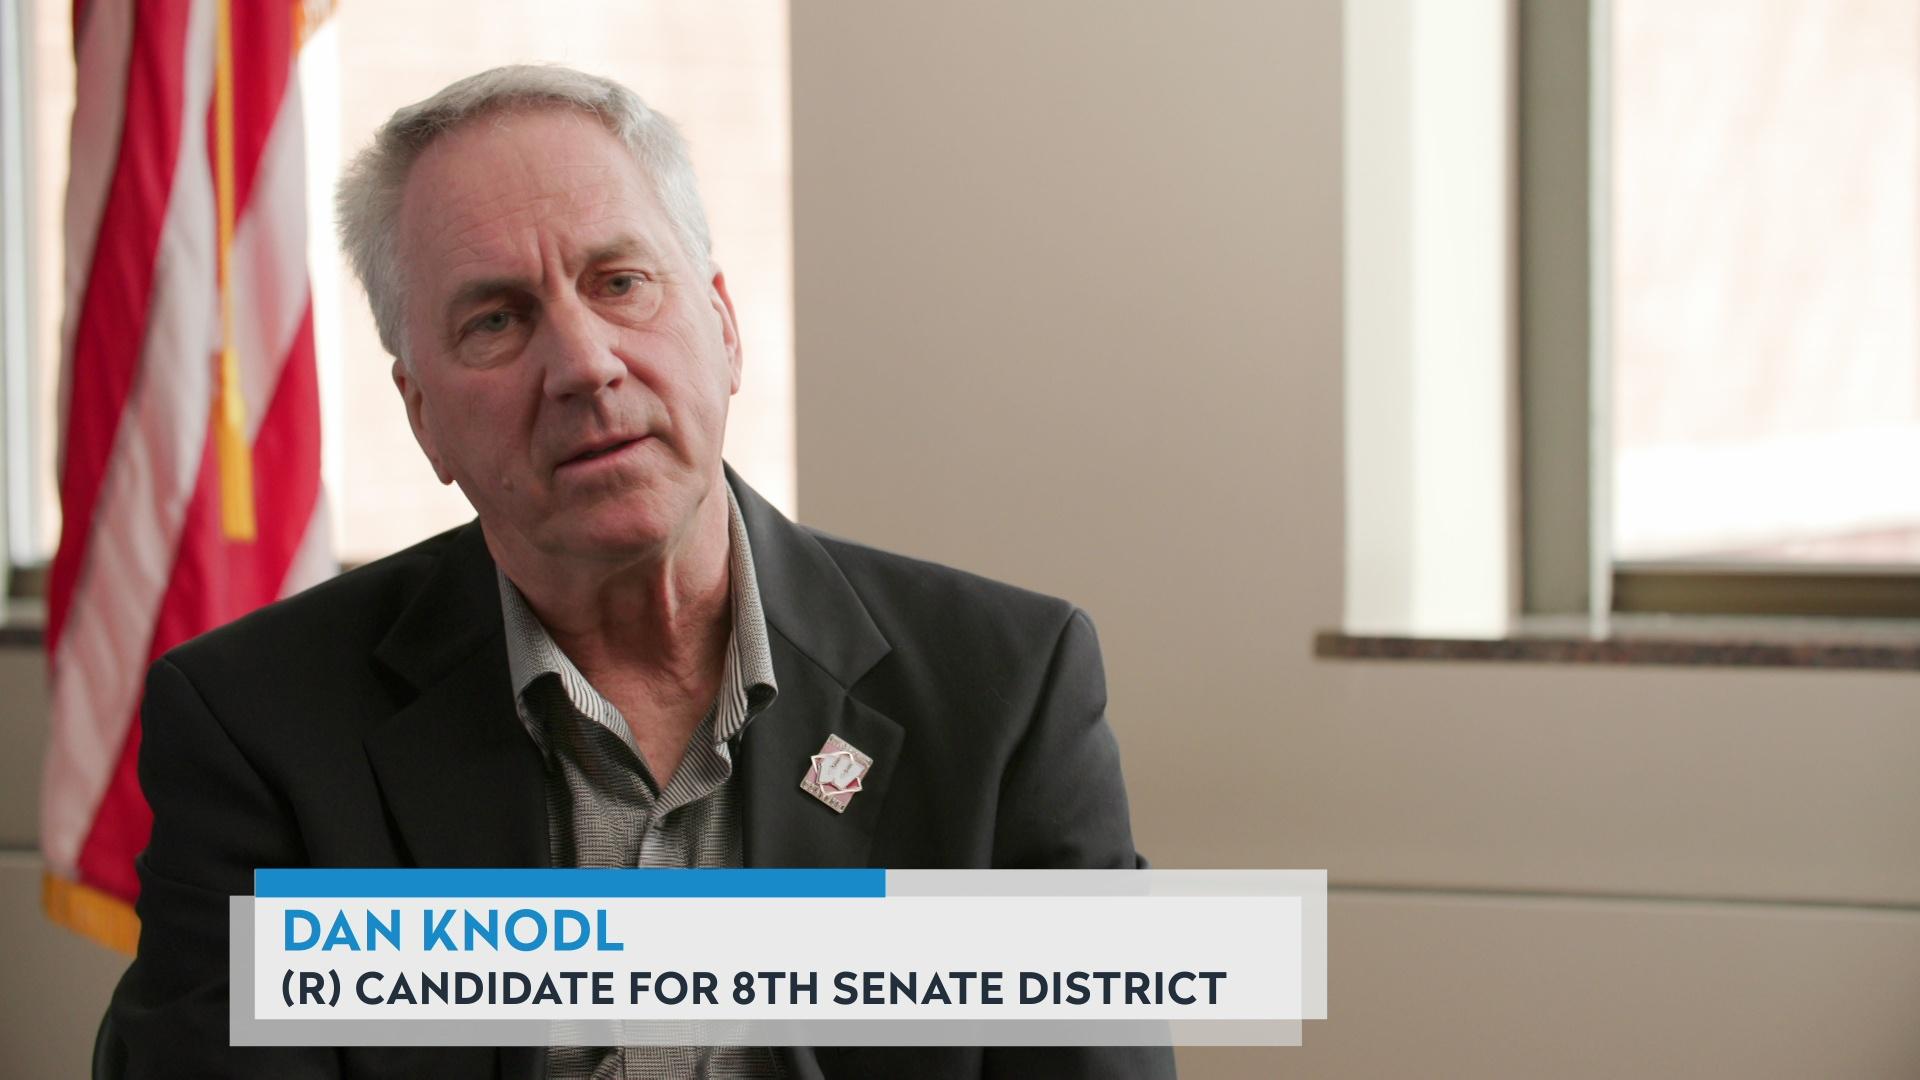 A still image from a video shows Dan Knodl sitting in a room with windows and a U.S. flag in the background, with a graphic at bottom reading 'Dan Knodl' and '(R) Candidate for 8th Senate District.' 